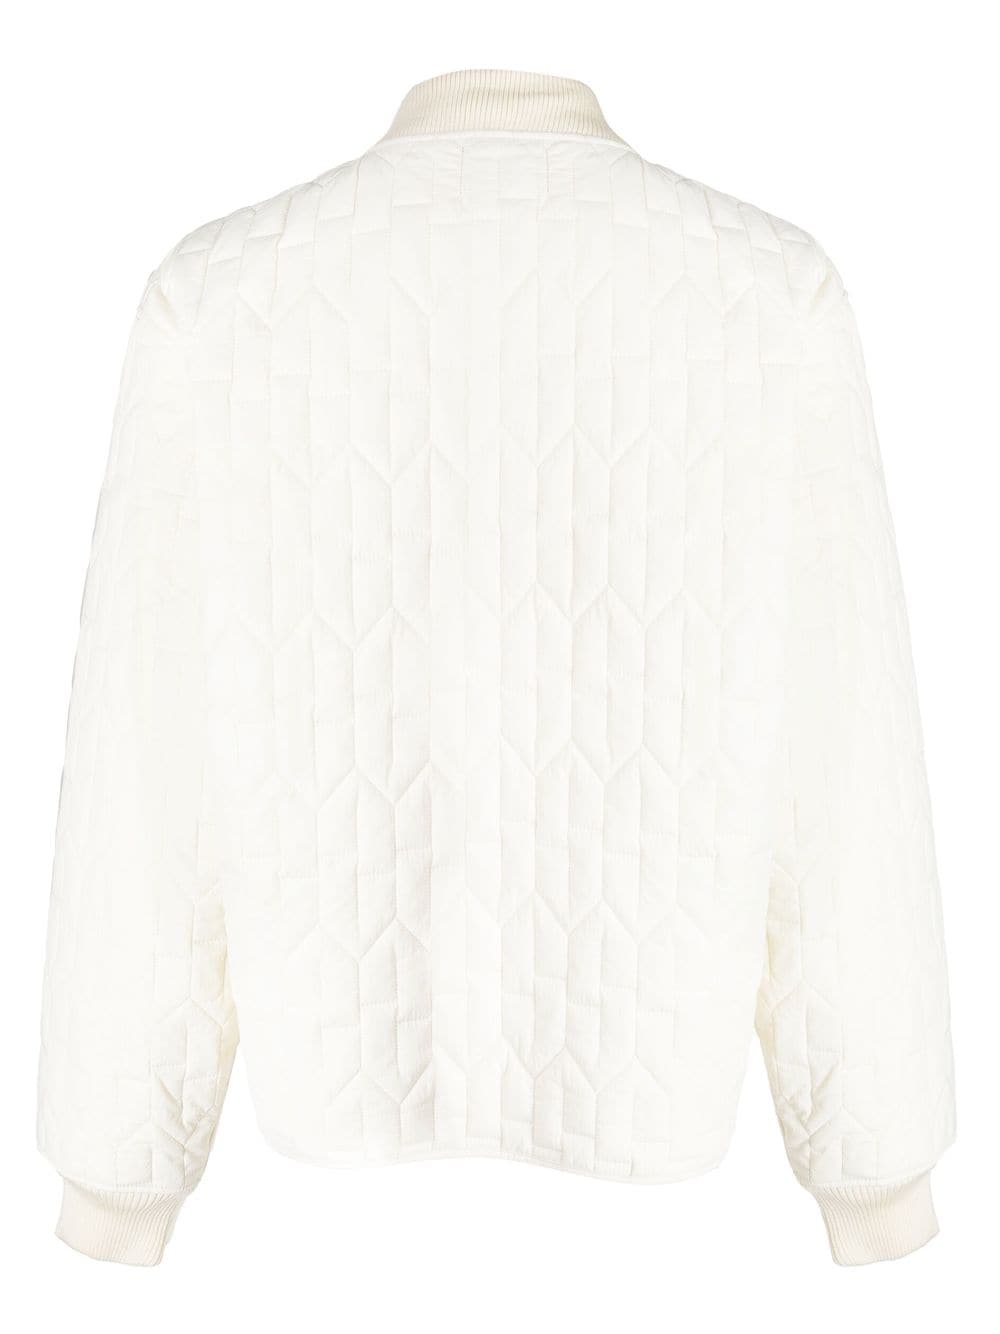 Chanel Vintage Quilted Bomber Jacket, $5,952, farfetch.com